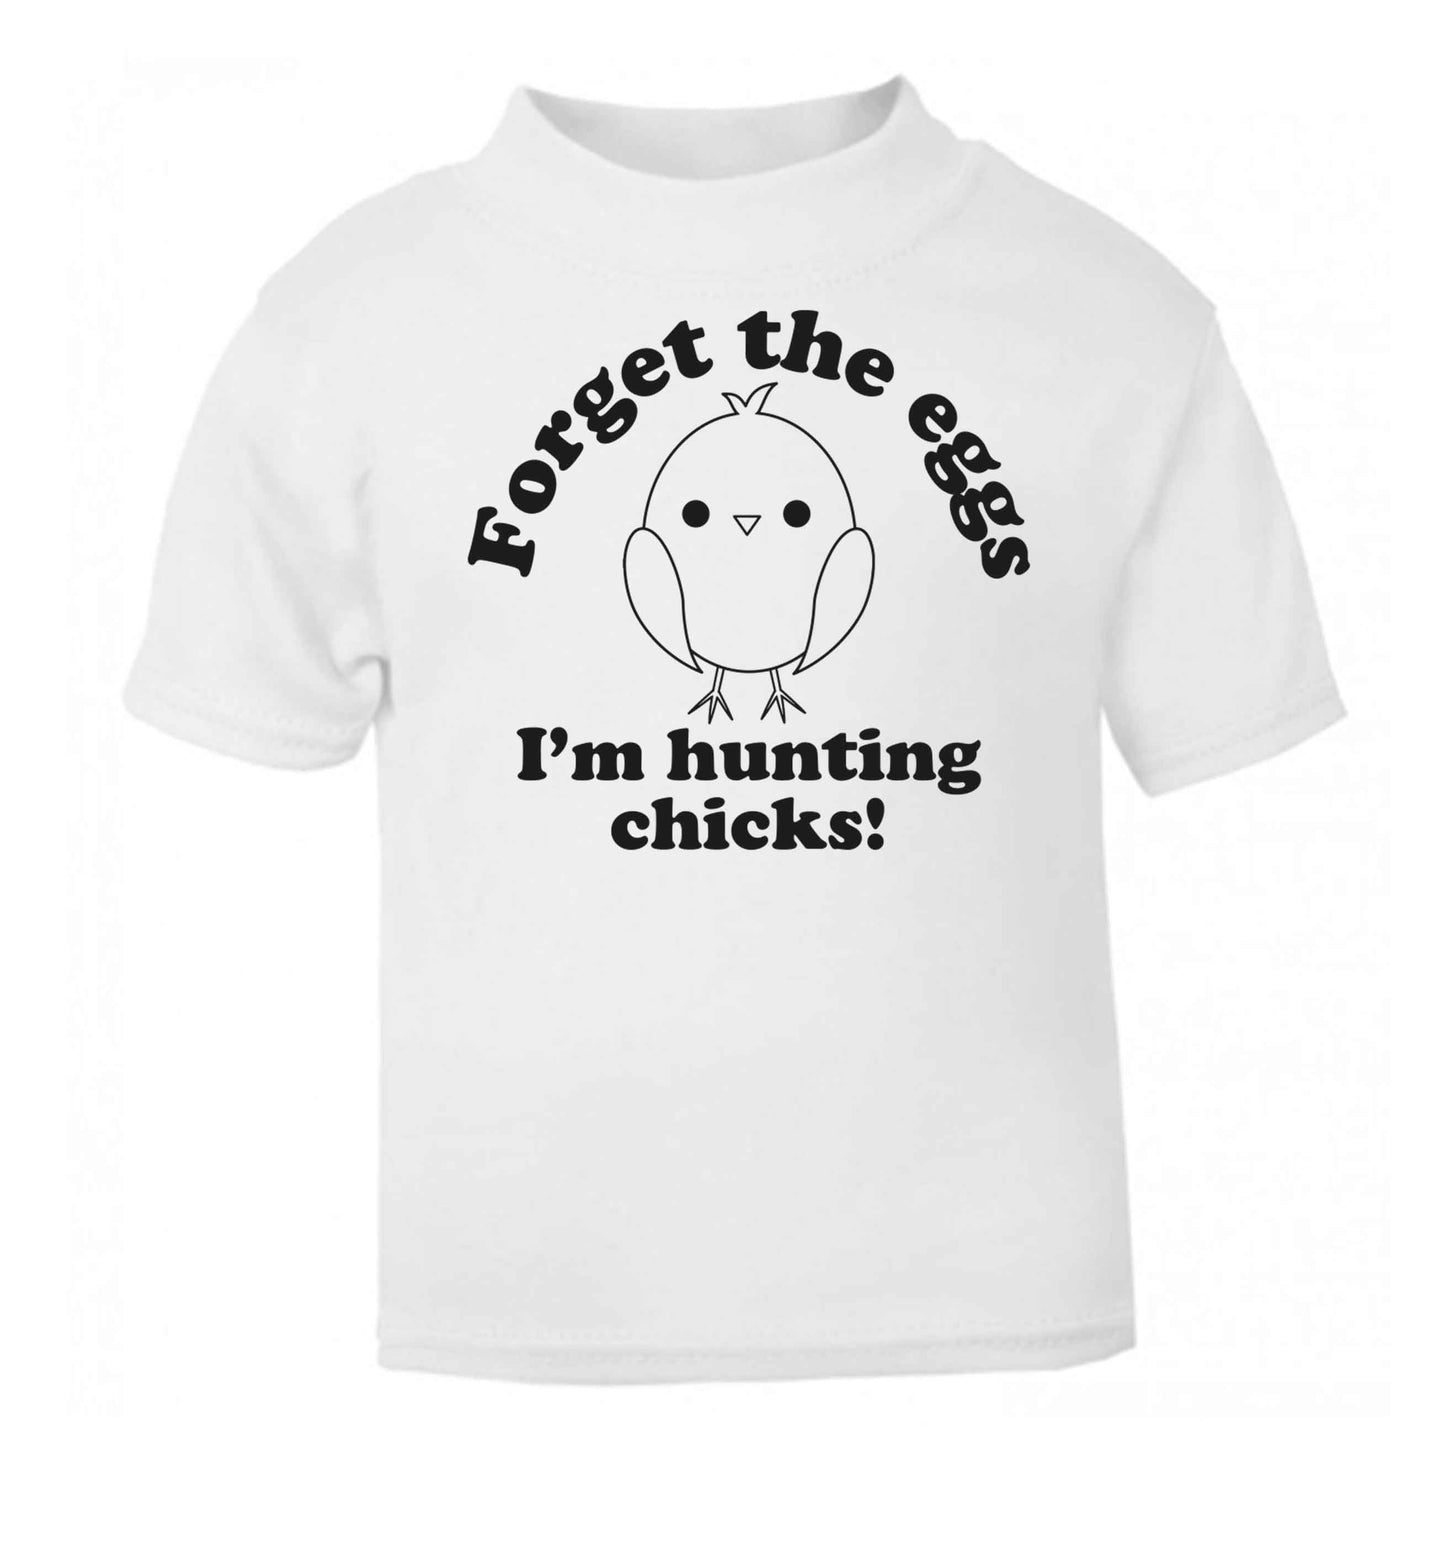 Forget the eggs I'm hunting chicks! white baby toddler Tshirt 2 Years